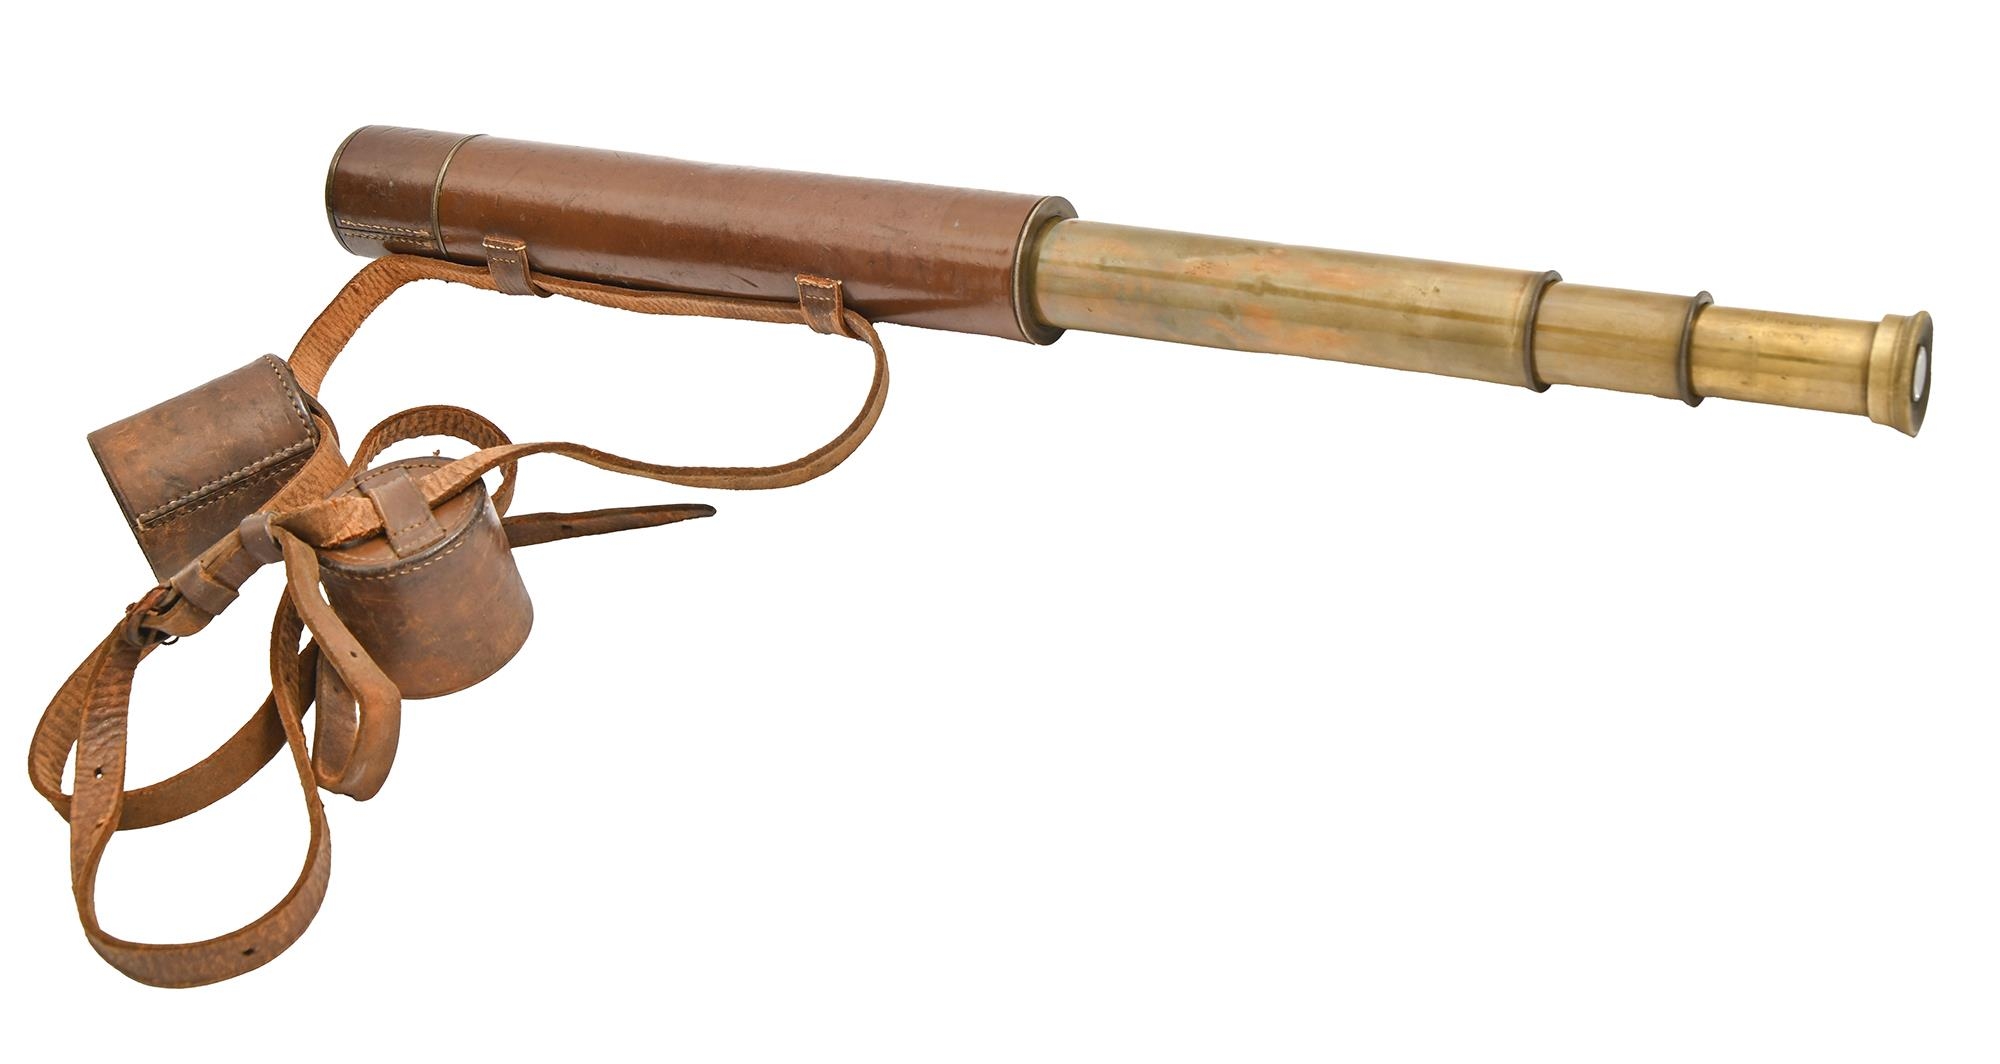 A 1.75" brass refracting telescope, The 'Marksman' J H Steward, London, c1900, with stitched leather